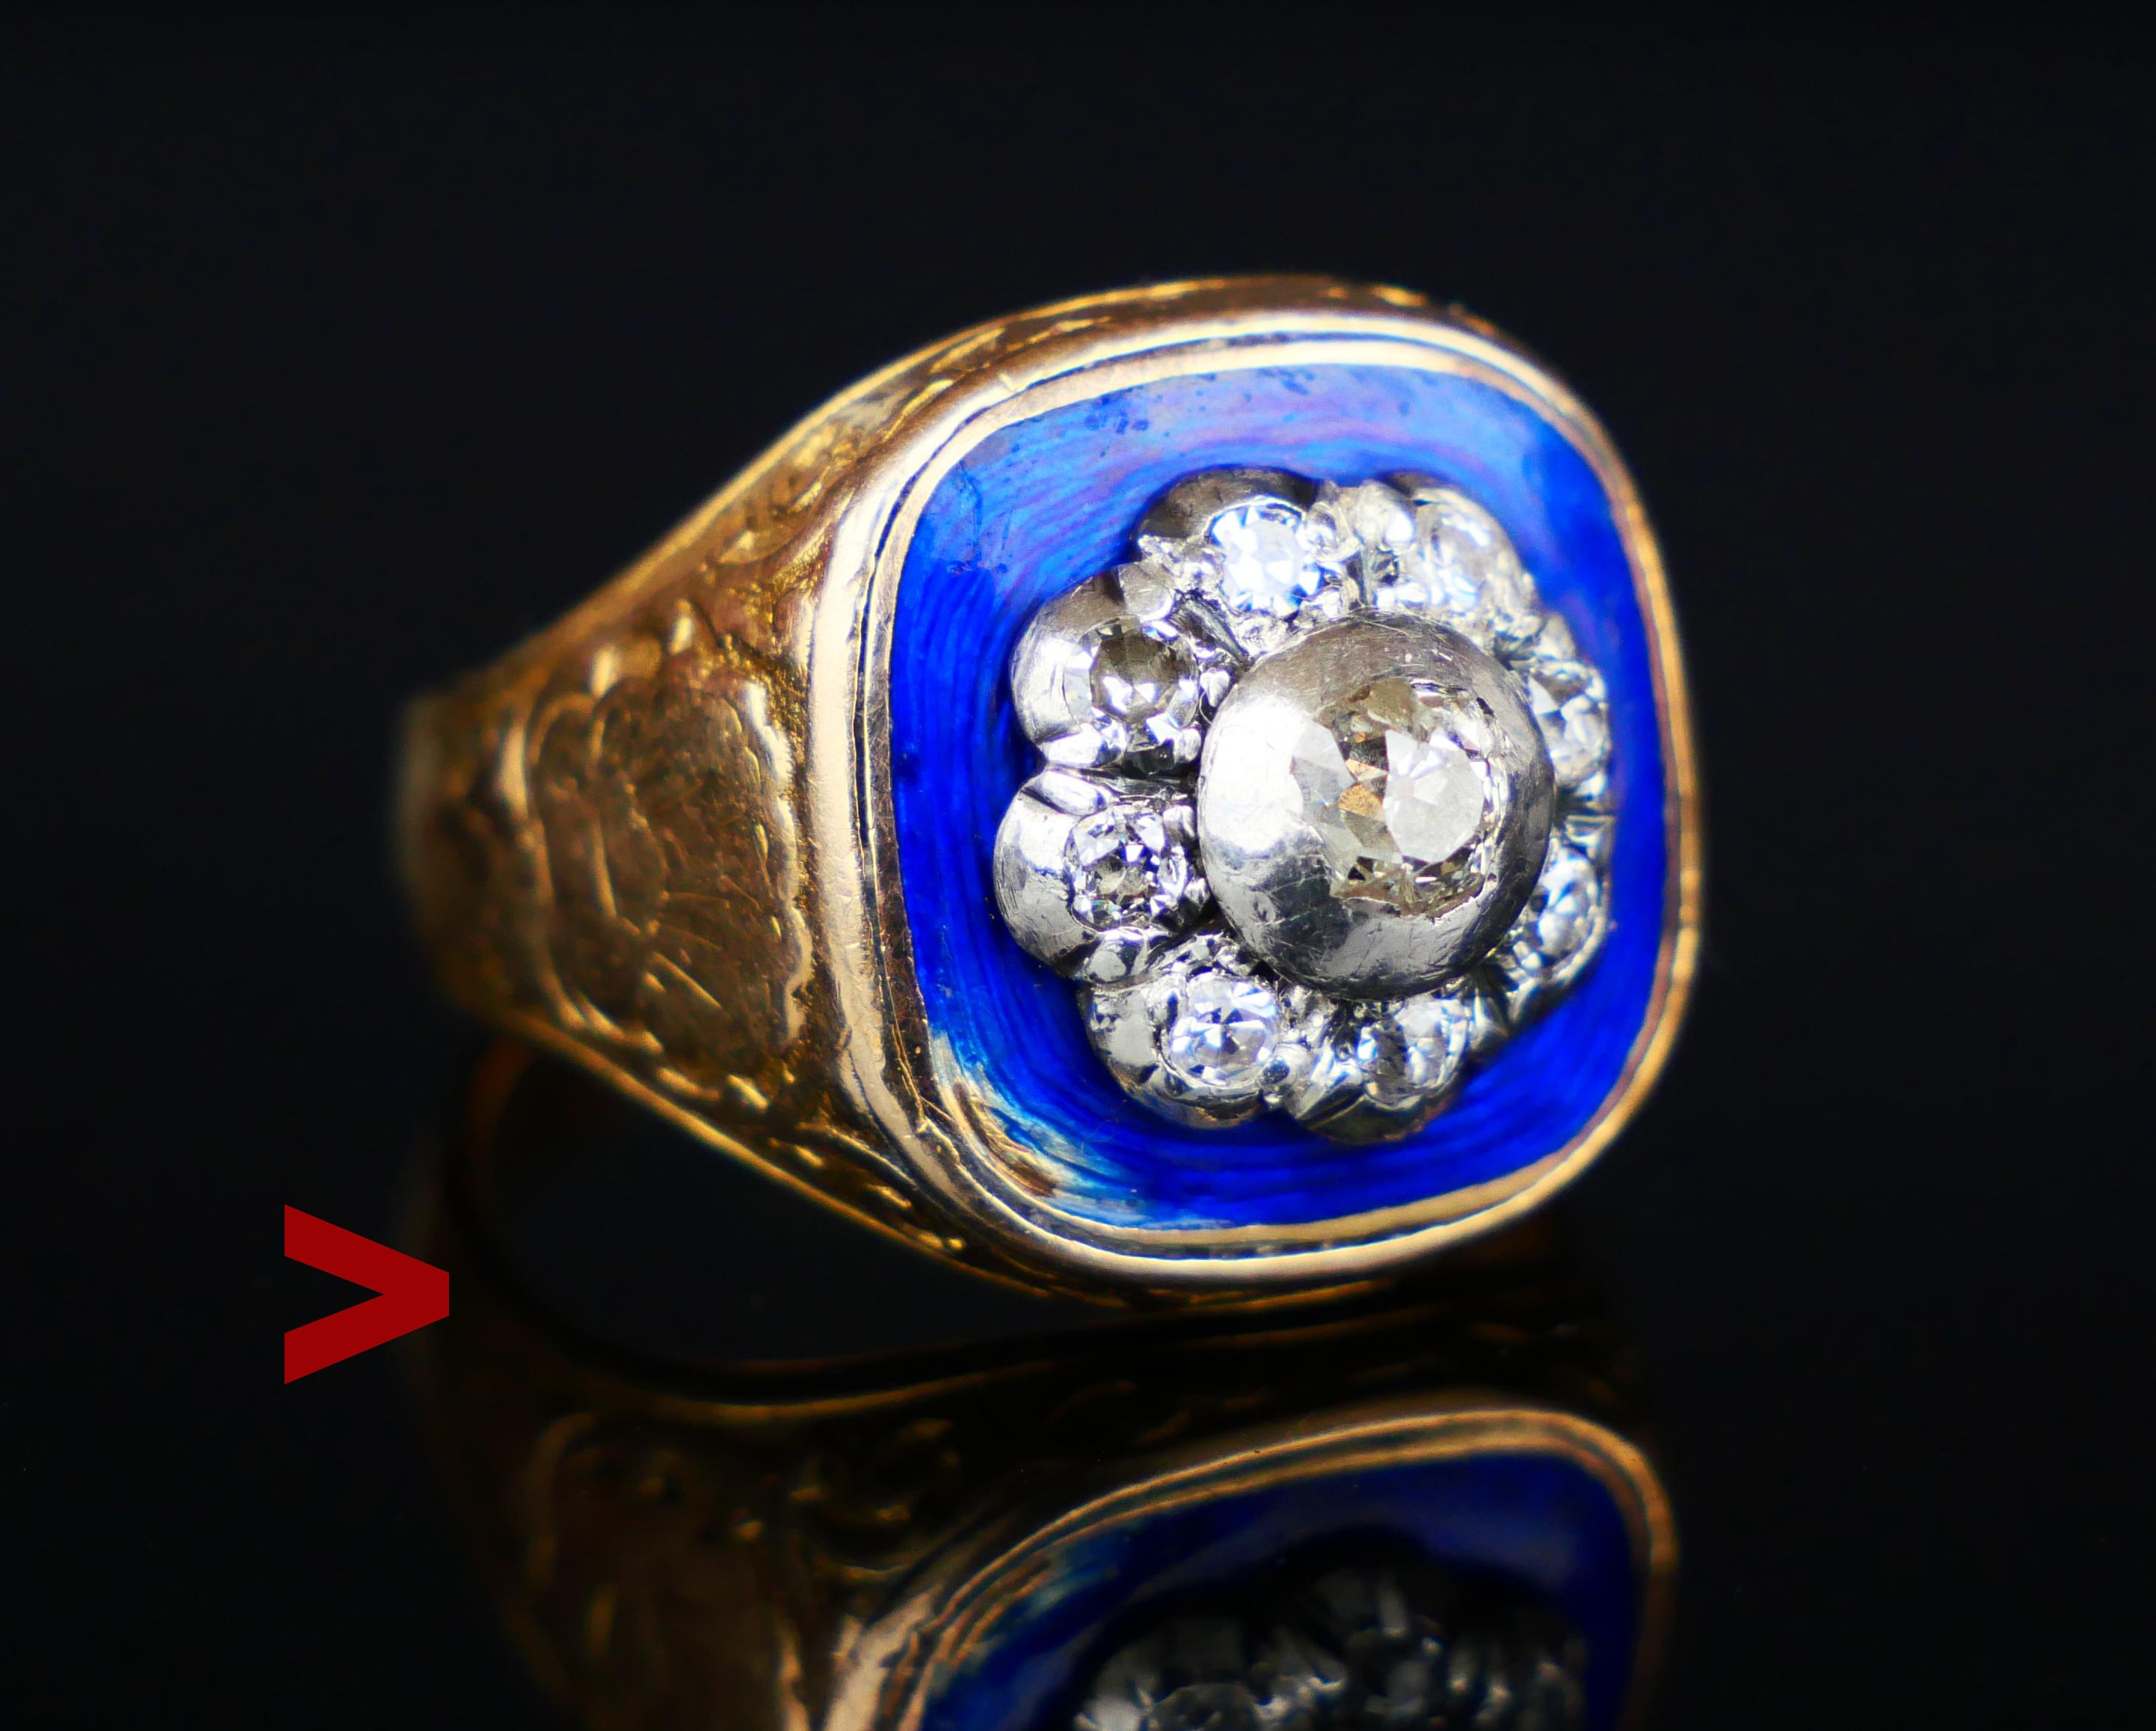 Very likely French Ring, a variety of Bague au Firmamen late 18th. -early 19th. cent. 
From 1775, jewelry with blue enamel backgrounds became popular in Europe, especially in England and France. In France this Blue and diamond jewellery type was